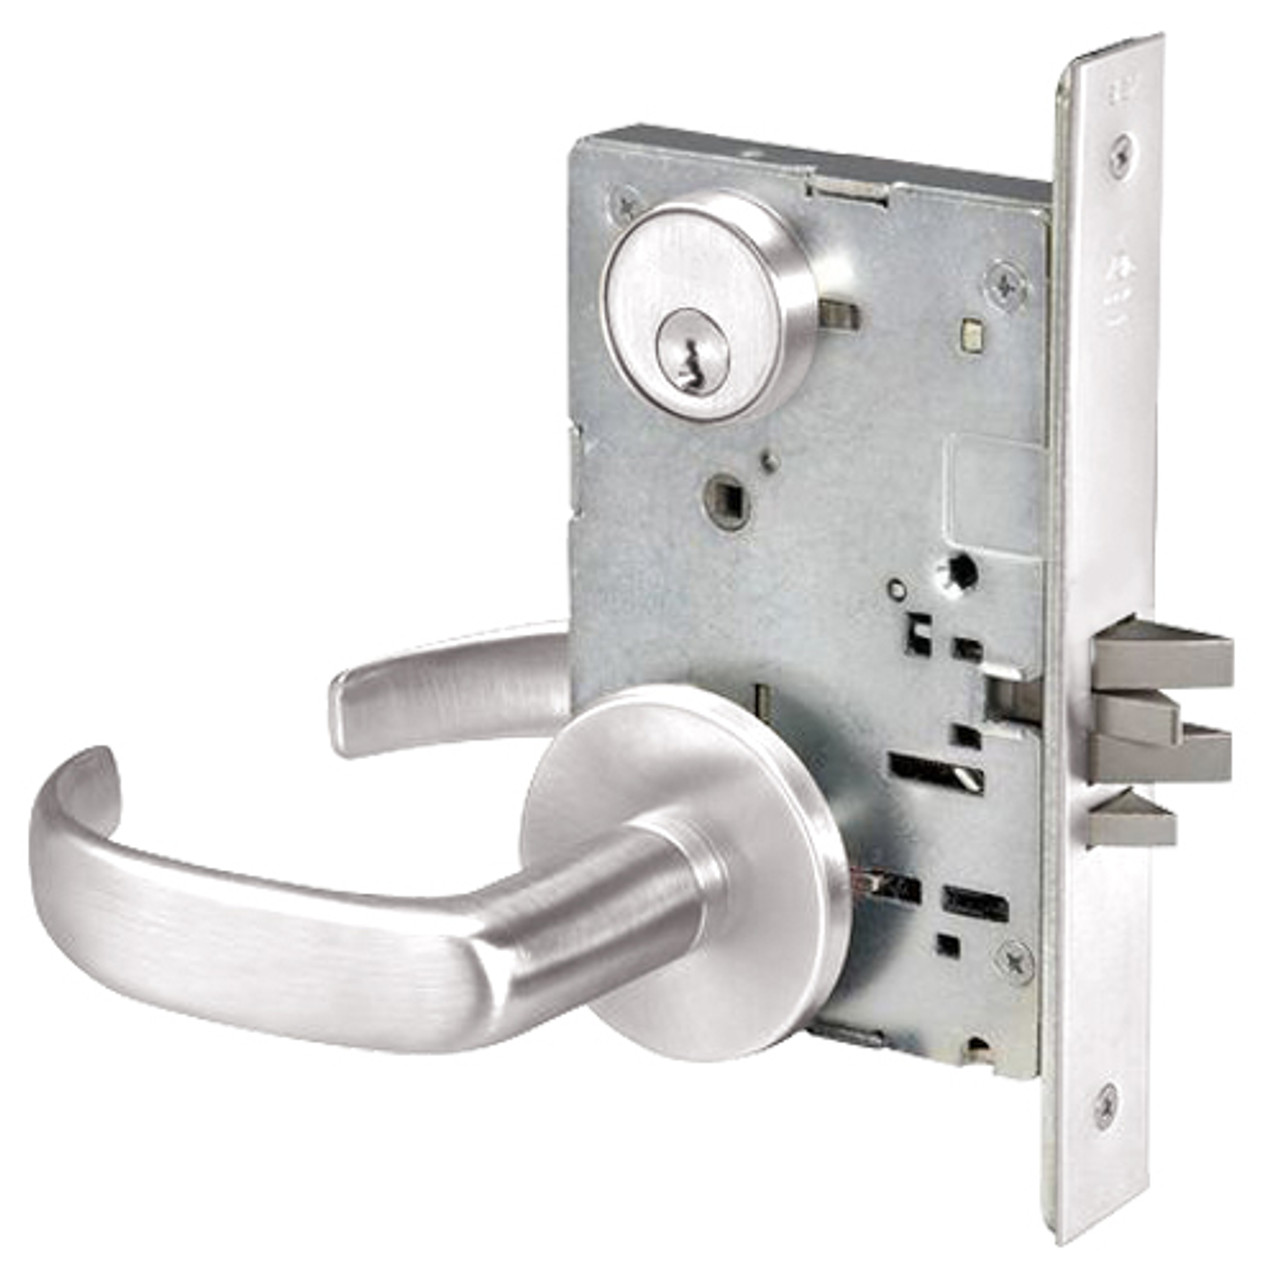 PBR8824FL-629 Yale 8800FL Series Single Cylinder Mortise Hold Back Locks with Pacific Beach Lever in Bright Stainless Steel